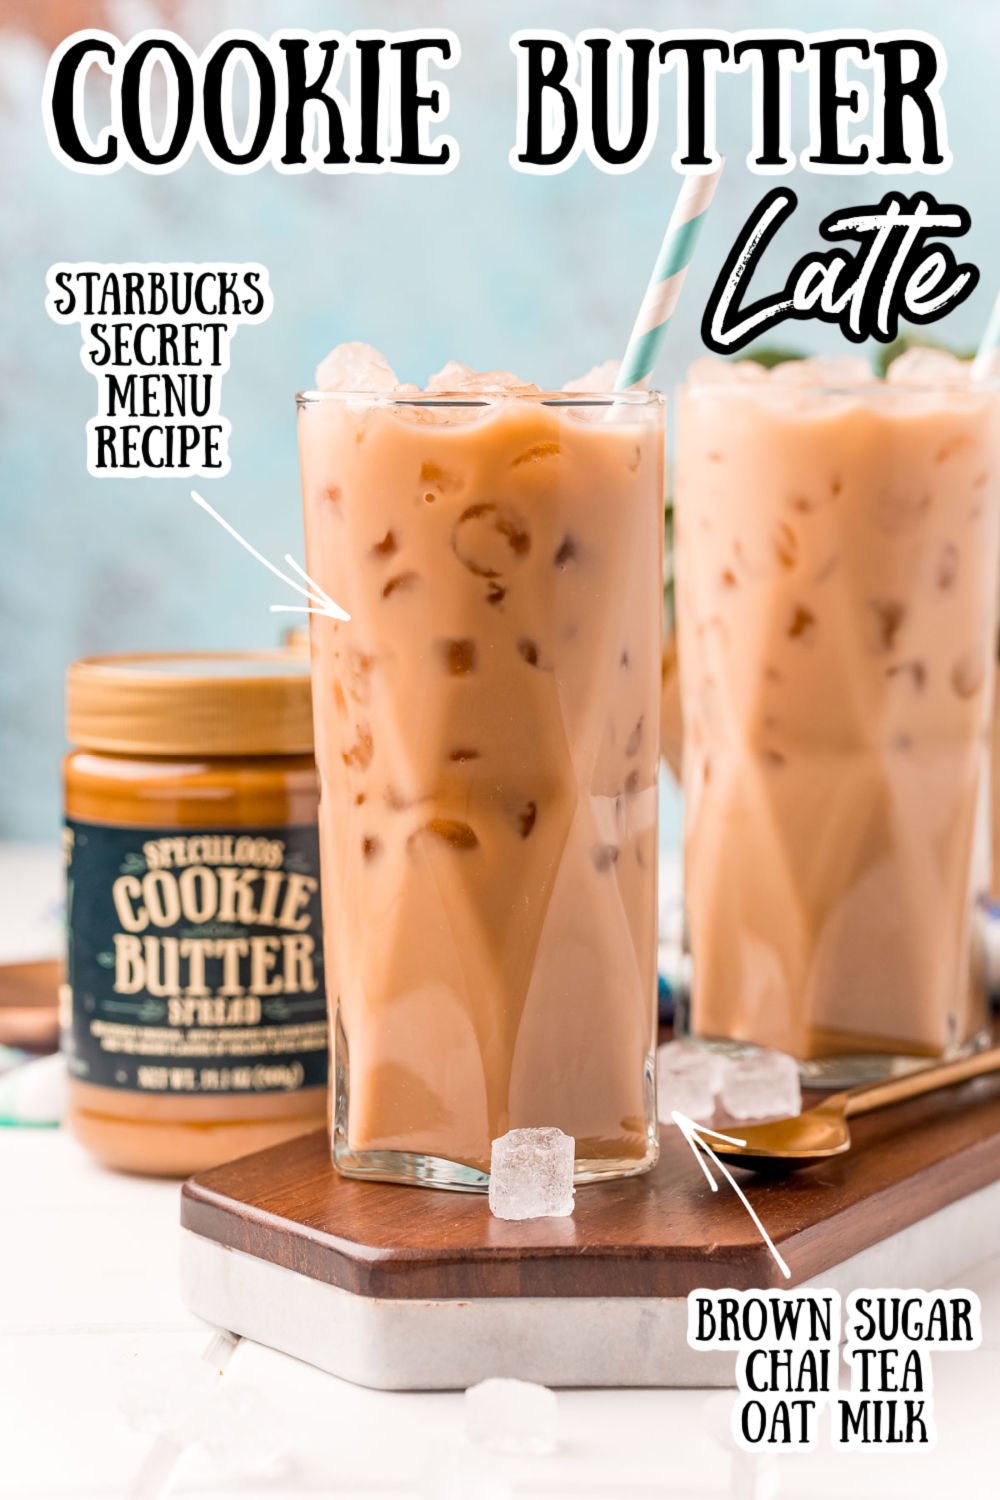 This Cookie Butter Latte is another Starbucks Secret Menu recipe taking TikTok by storm! It's sweet, delicious, creamy, and tastes just like Trader Joe's Speculoos Cookie Butter! via @sugarandsoulco